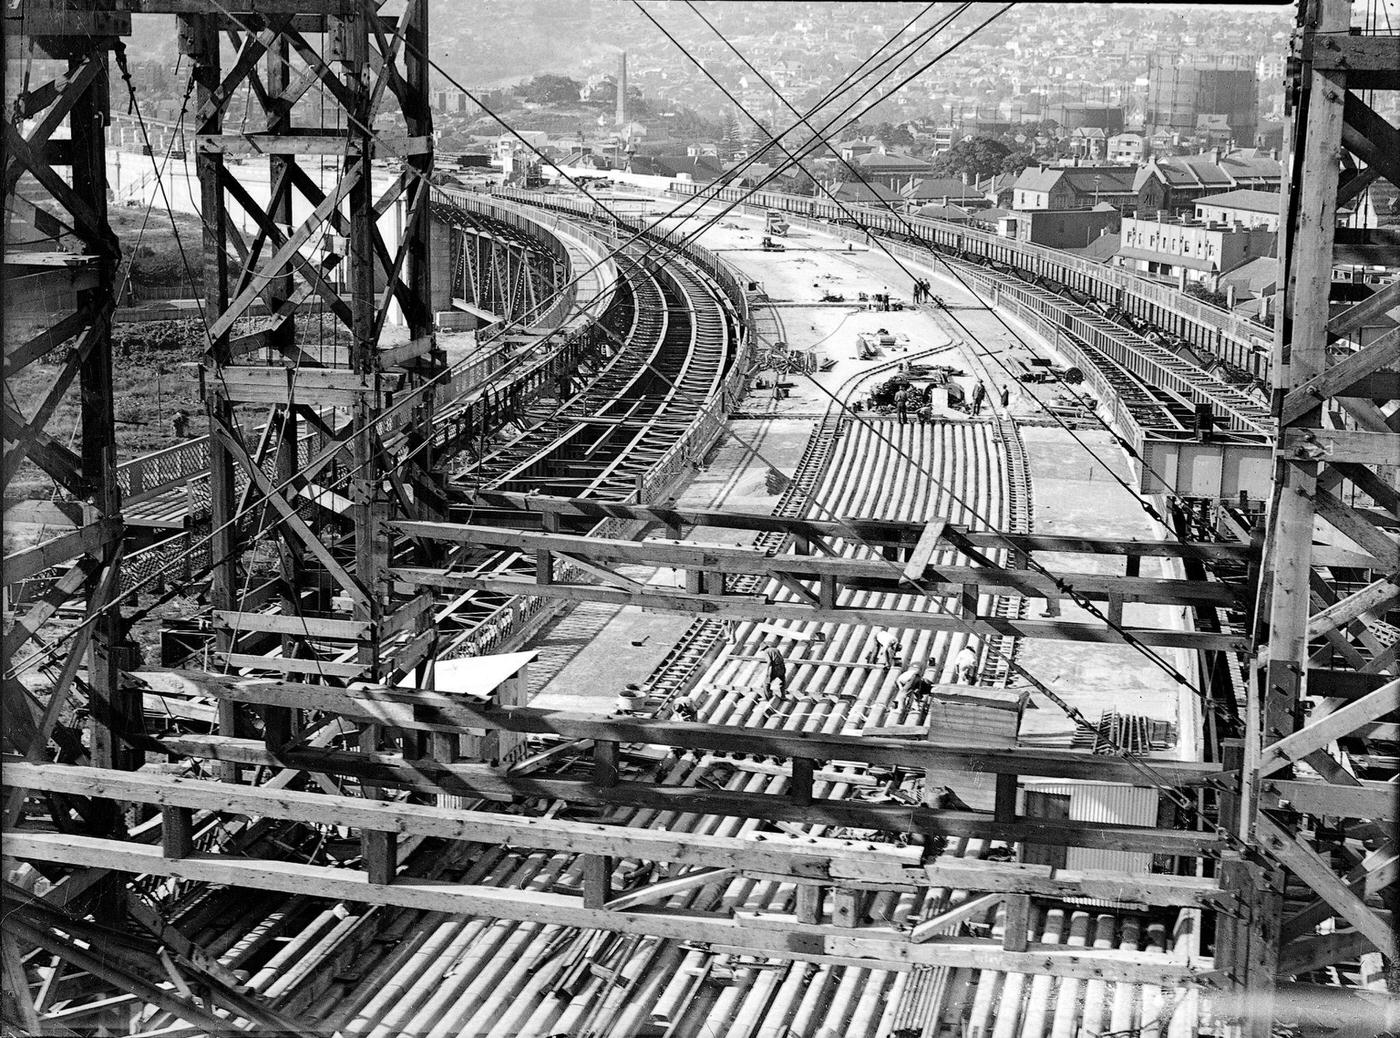 Construction of the Sydney Harbour Bridge during the 1920s